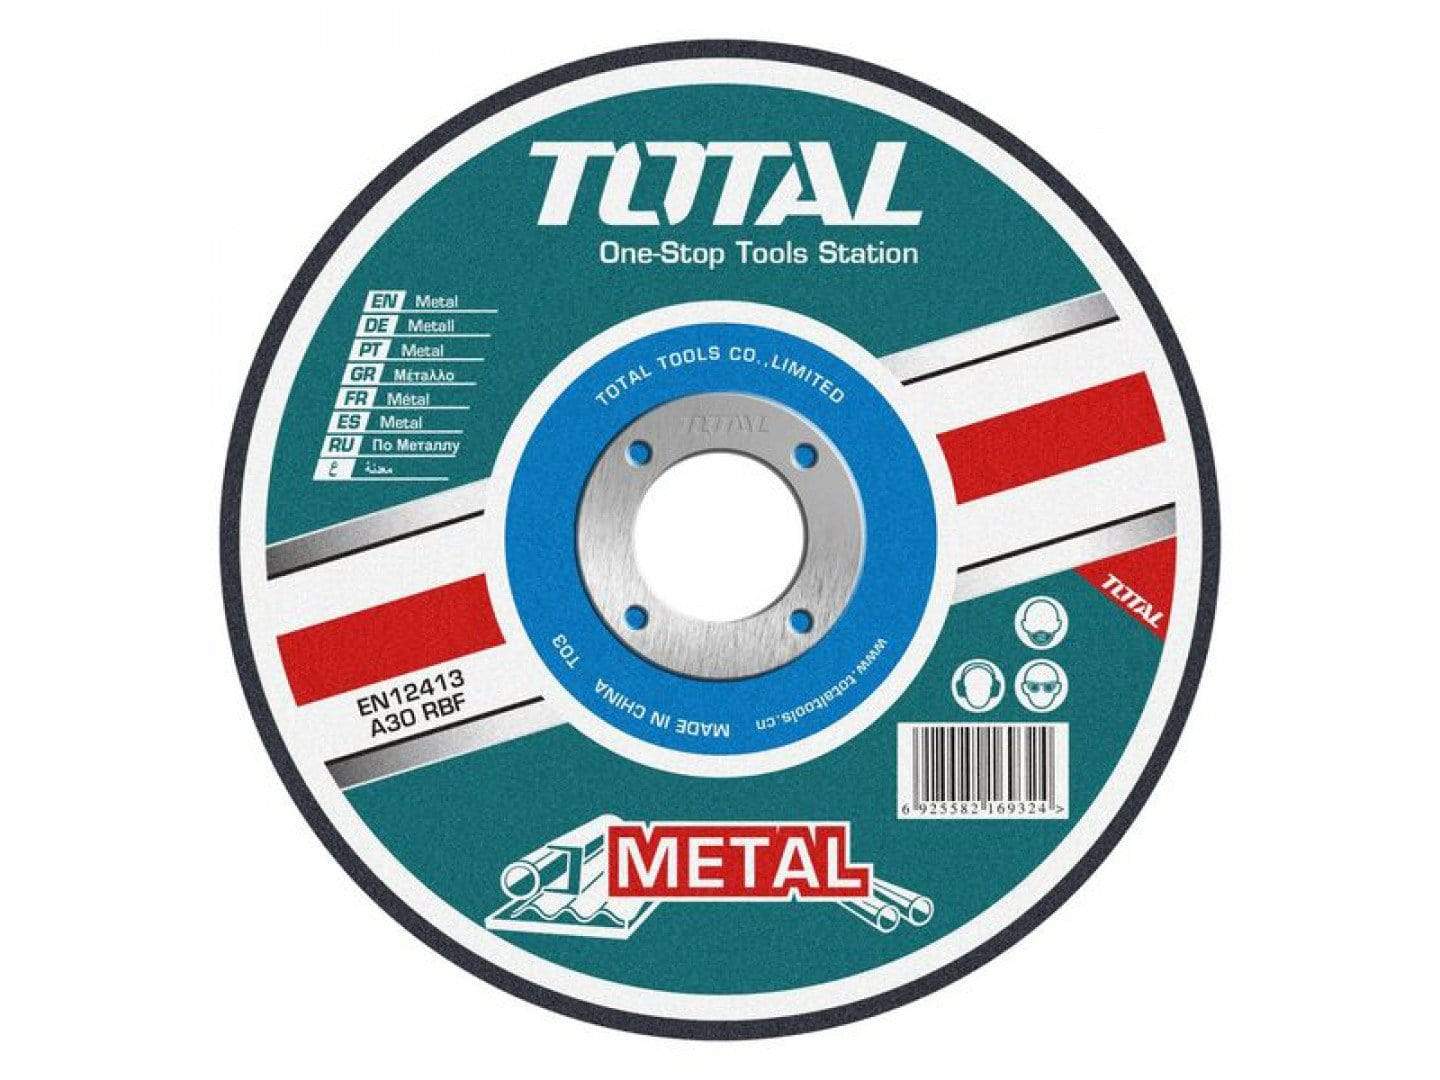 Total Abrasive Metal Cutting Disc 115 x 22mm - TAC2211153 | Supply Master | Accra, Ghana Tools Building Steel Engineering Hardware tool